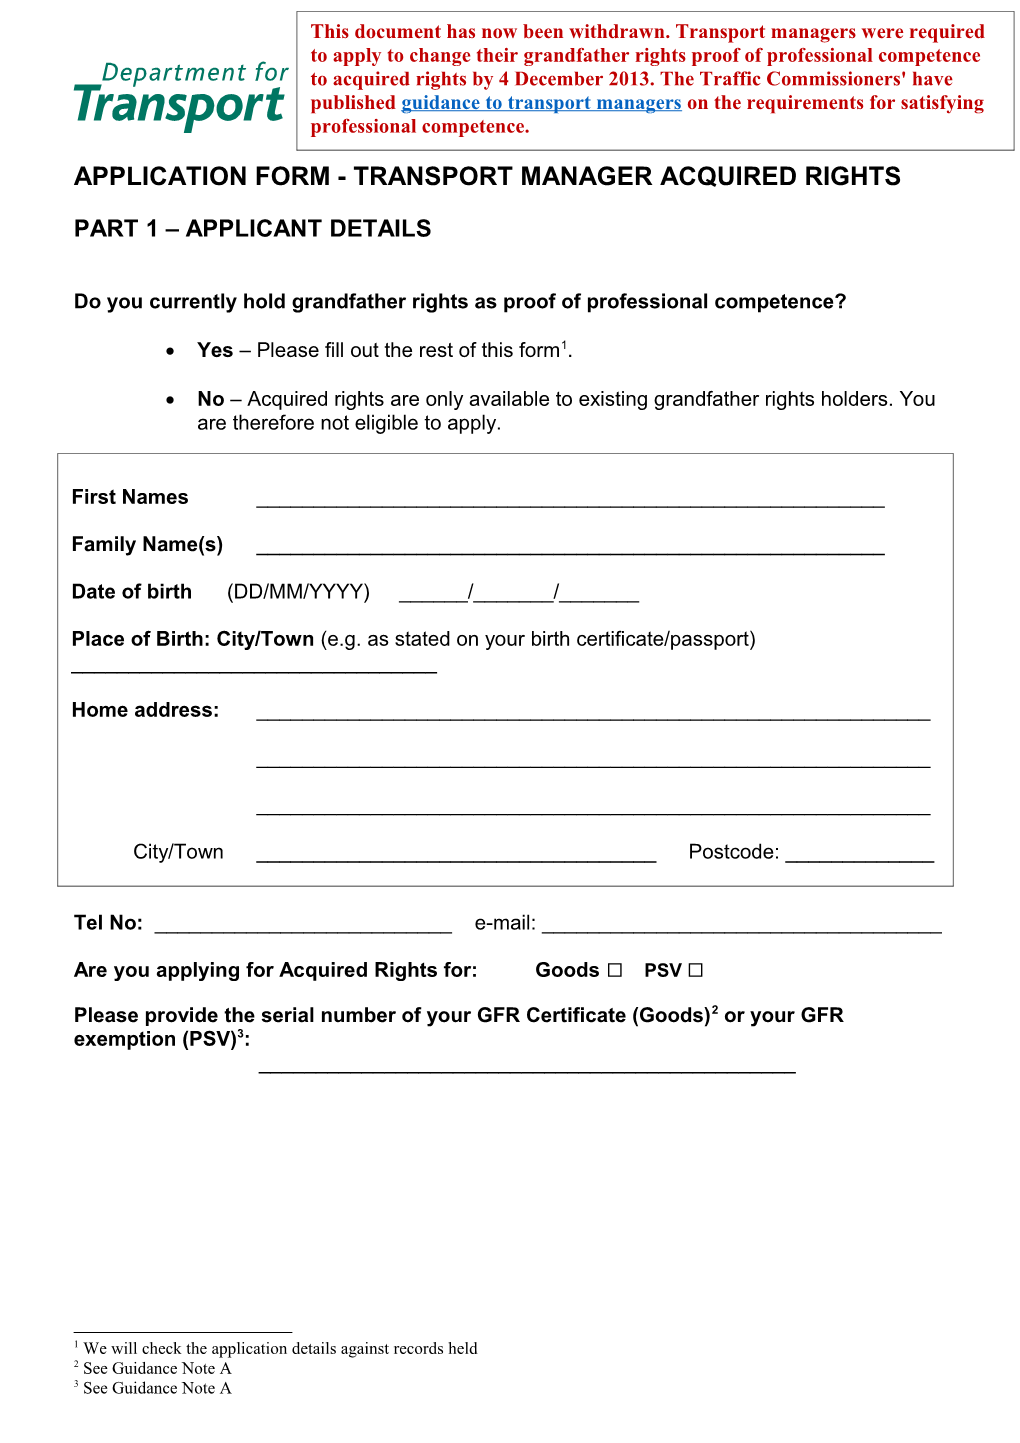 Transport Manager Acquired Rights Application Form